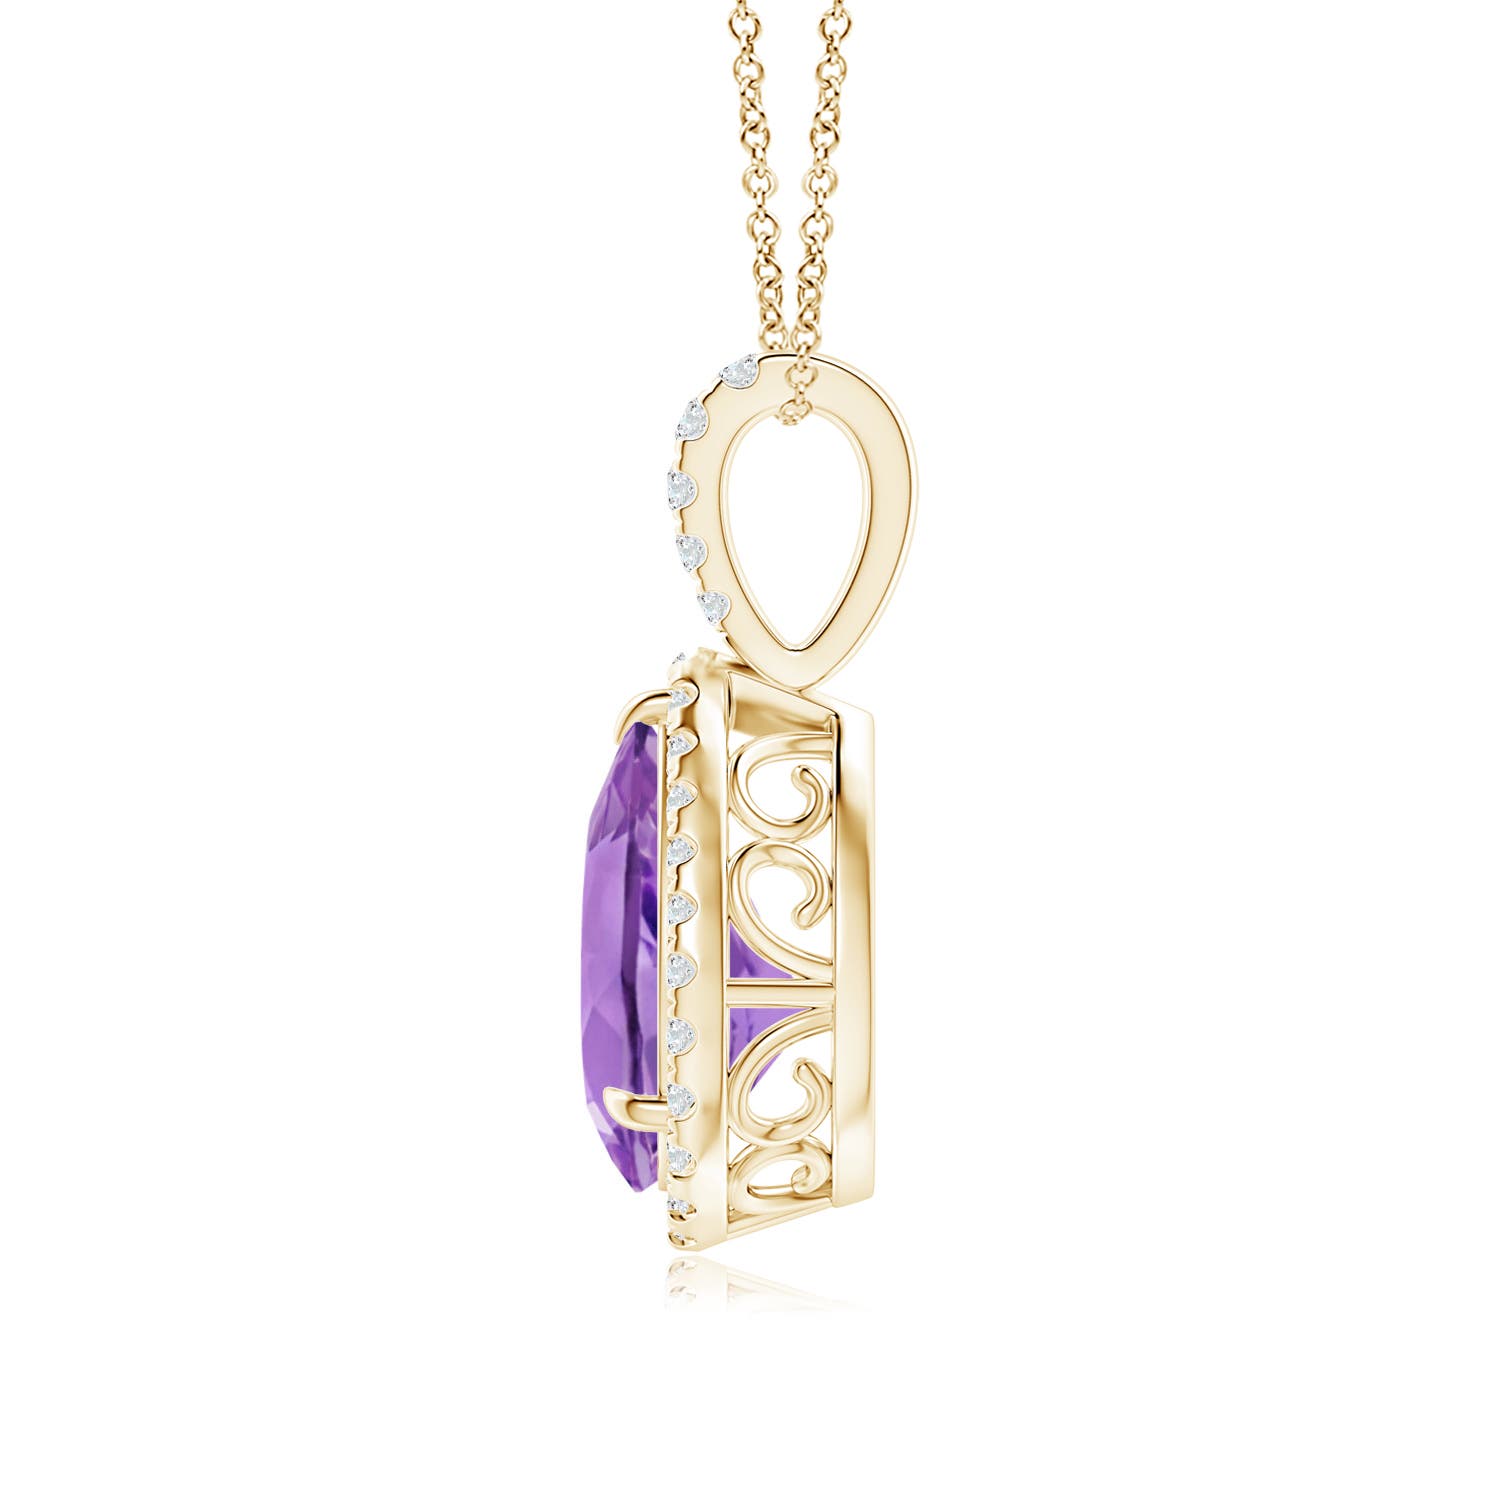 A - Amethyst / 1.78 CT / 14 KT Yellow Gold